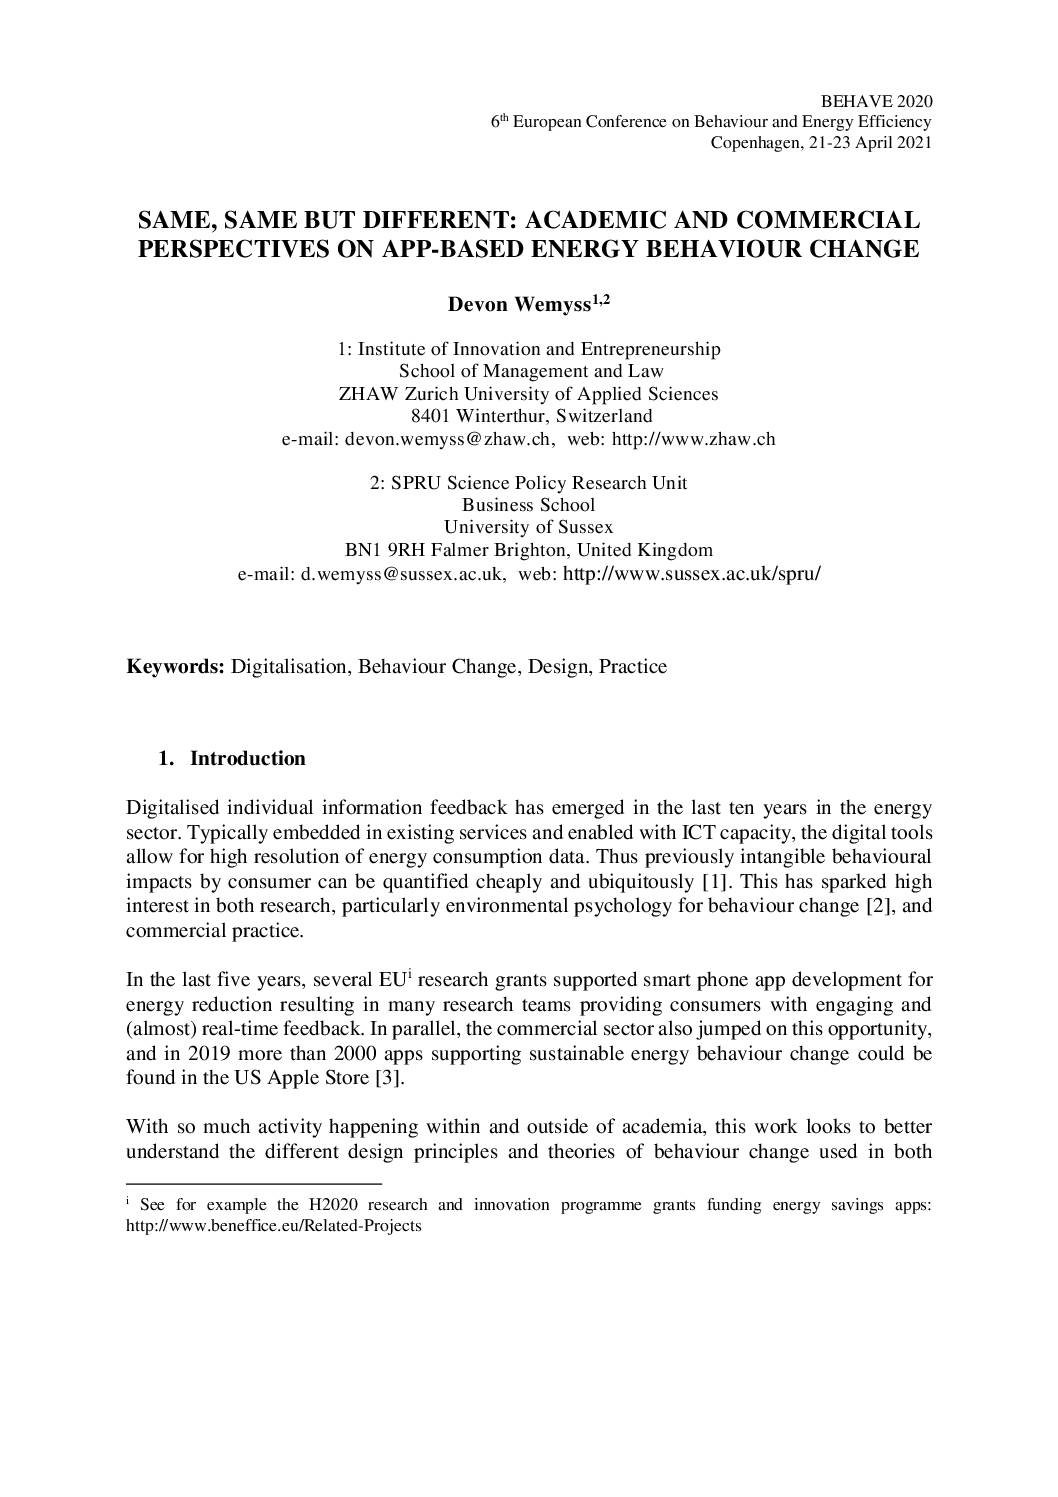 Same, same but different: academic and commercial perspectives on app-based energy behaviour change